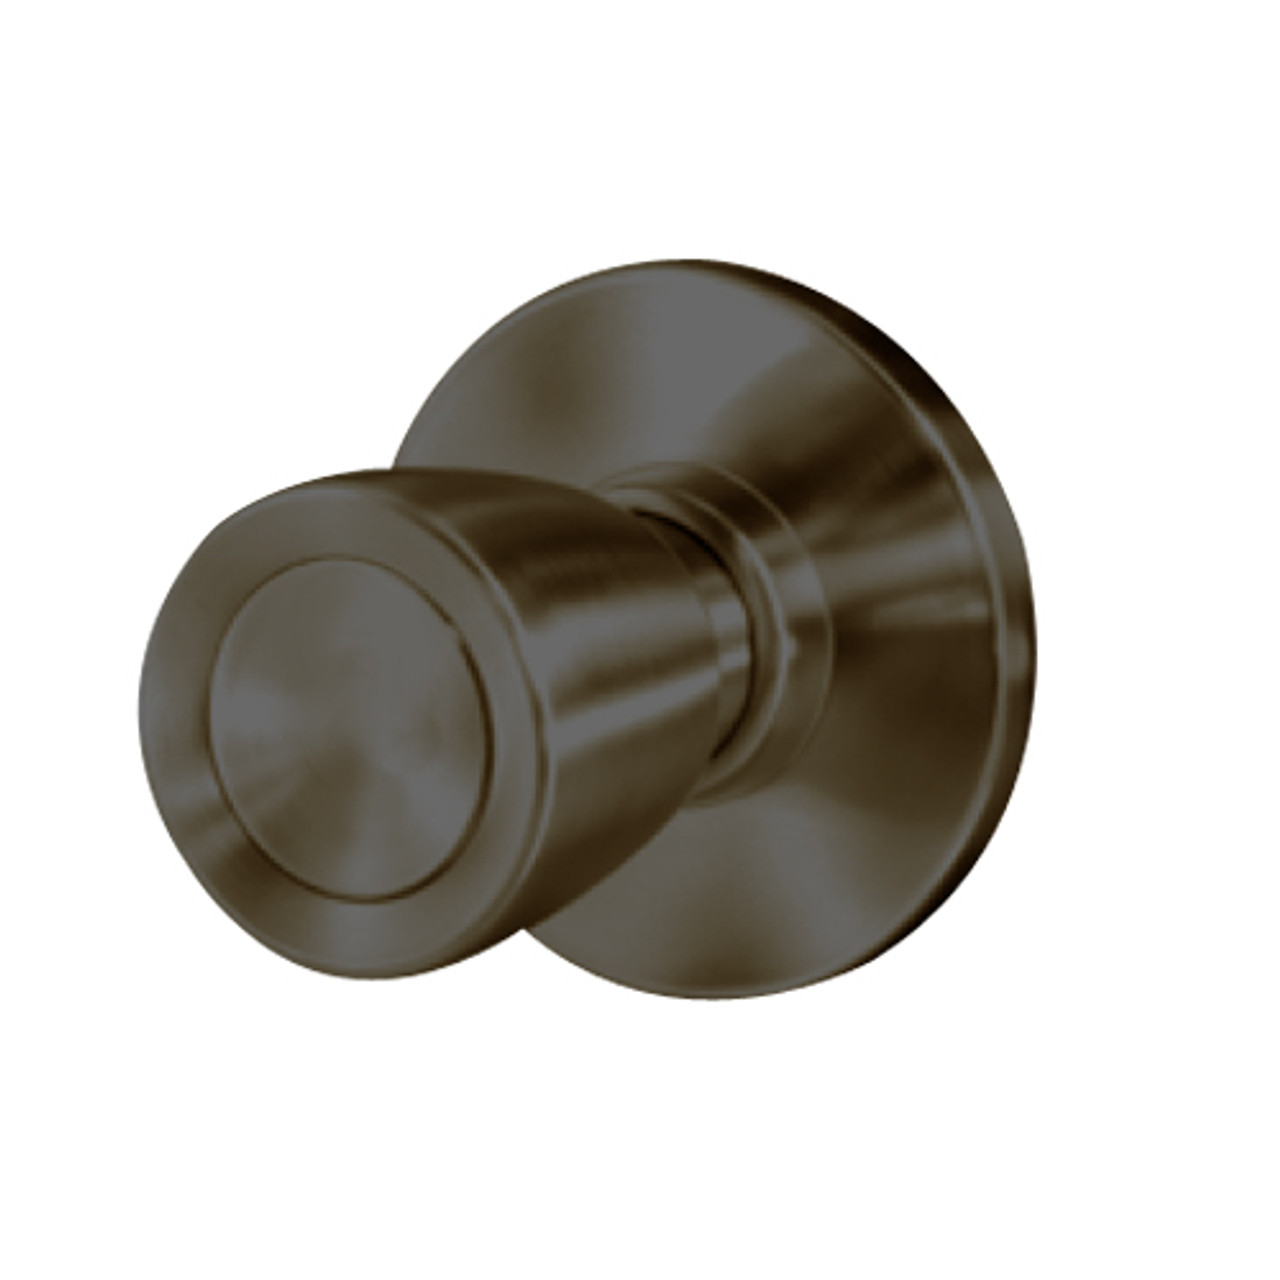 8K30N6AS3613 Best 8K Series Passage Heavy Duty Cylindrical Knob Locks with Tulip Style in Oil Rubbed Bronze